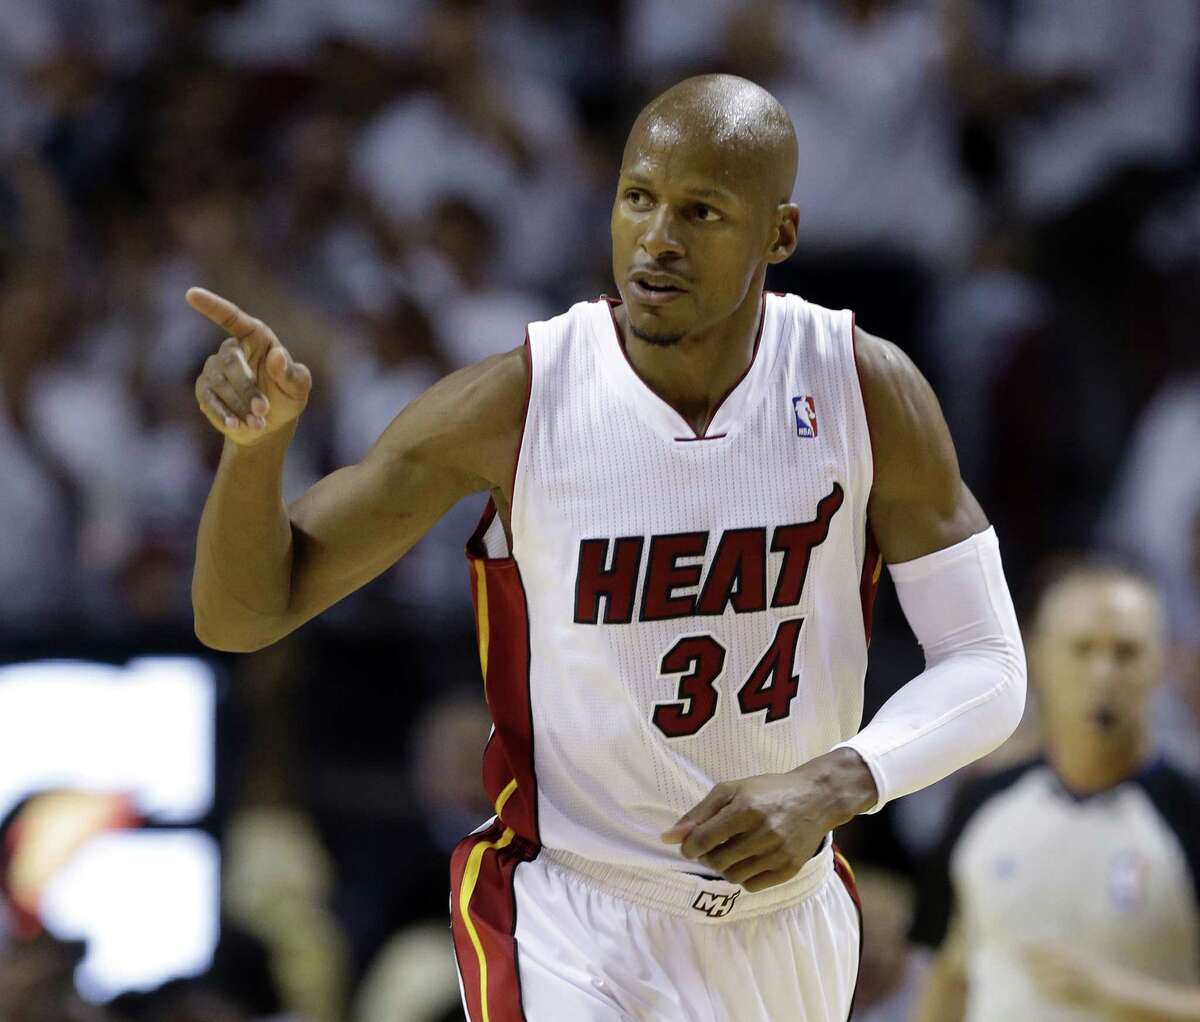 Ray Allen has announced through his agent that he will not play in the NBA this season.